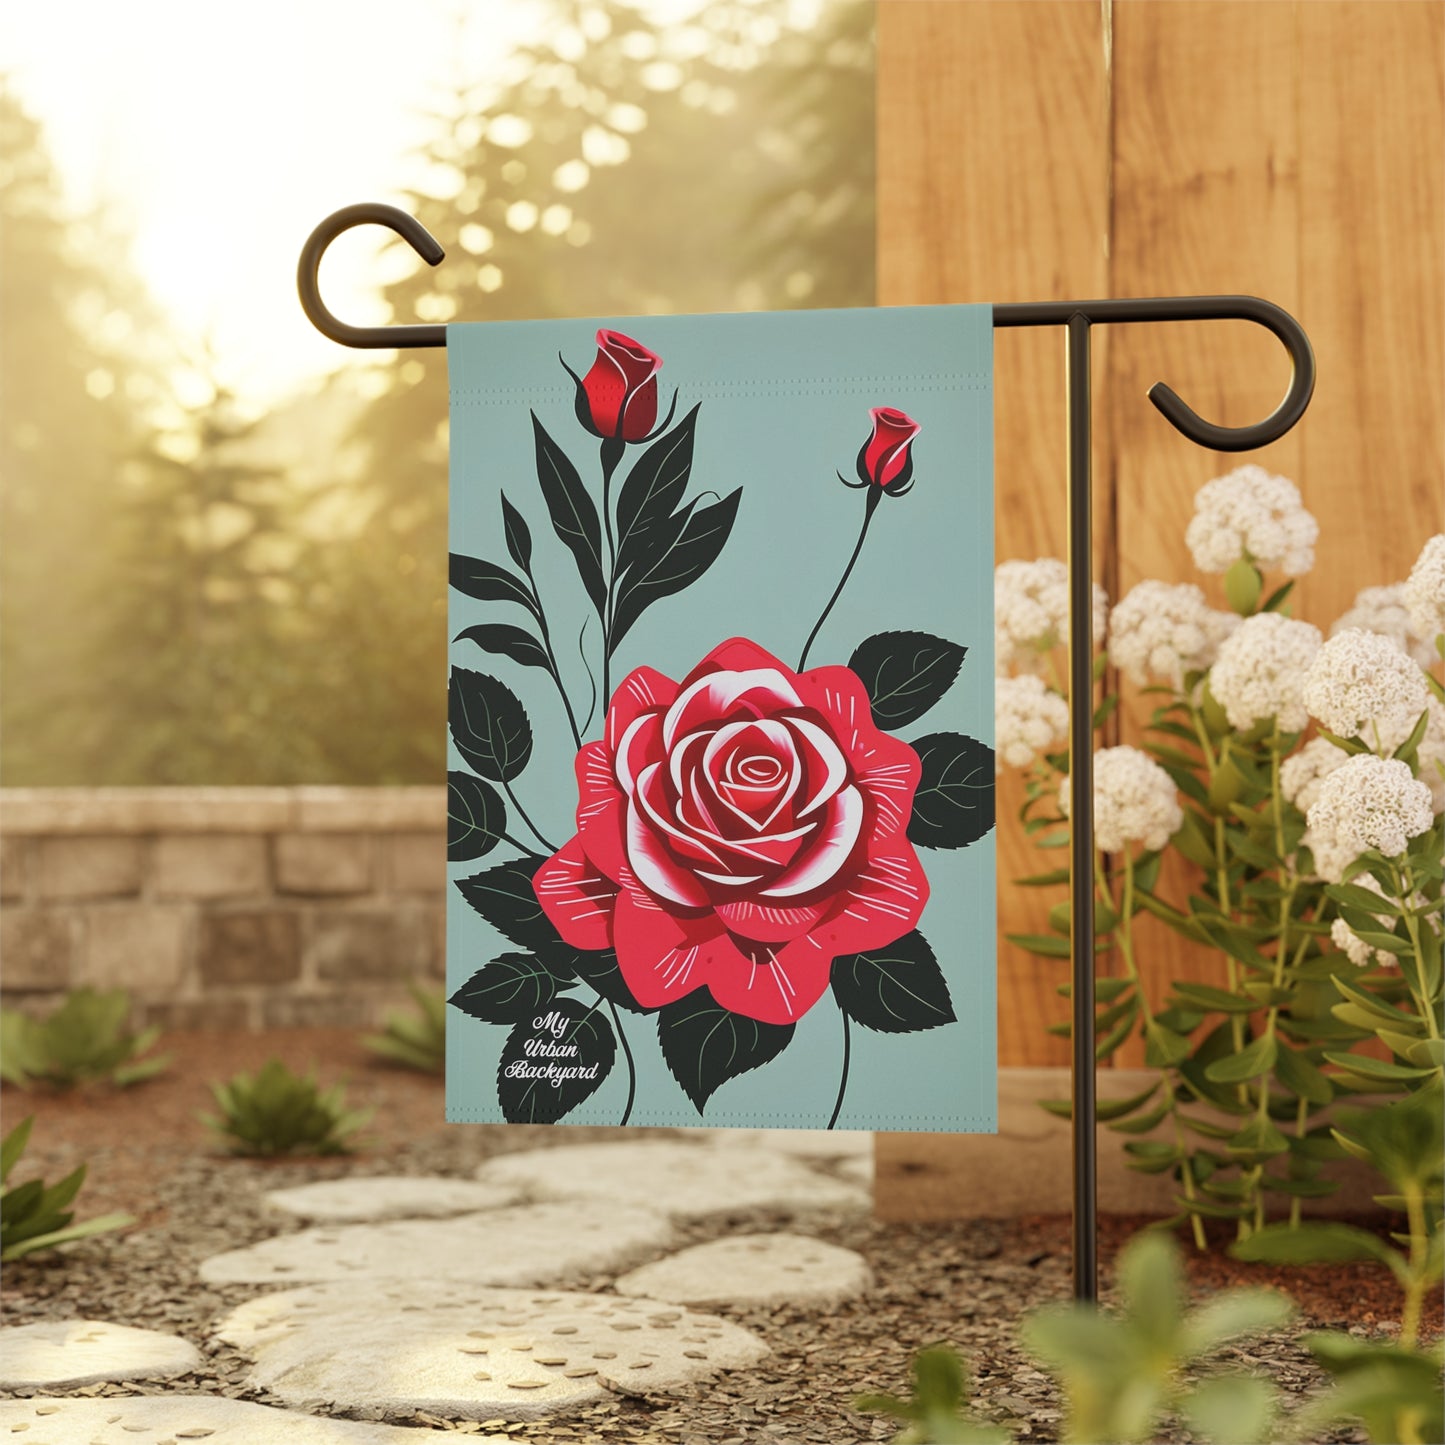 Red Roses, Garden Flag for Yard, Patio, Porch, or Work, 12"x18" - Flag only